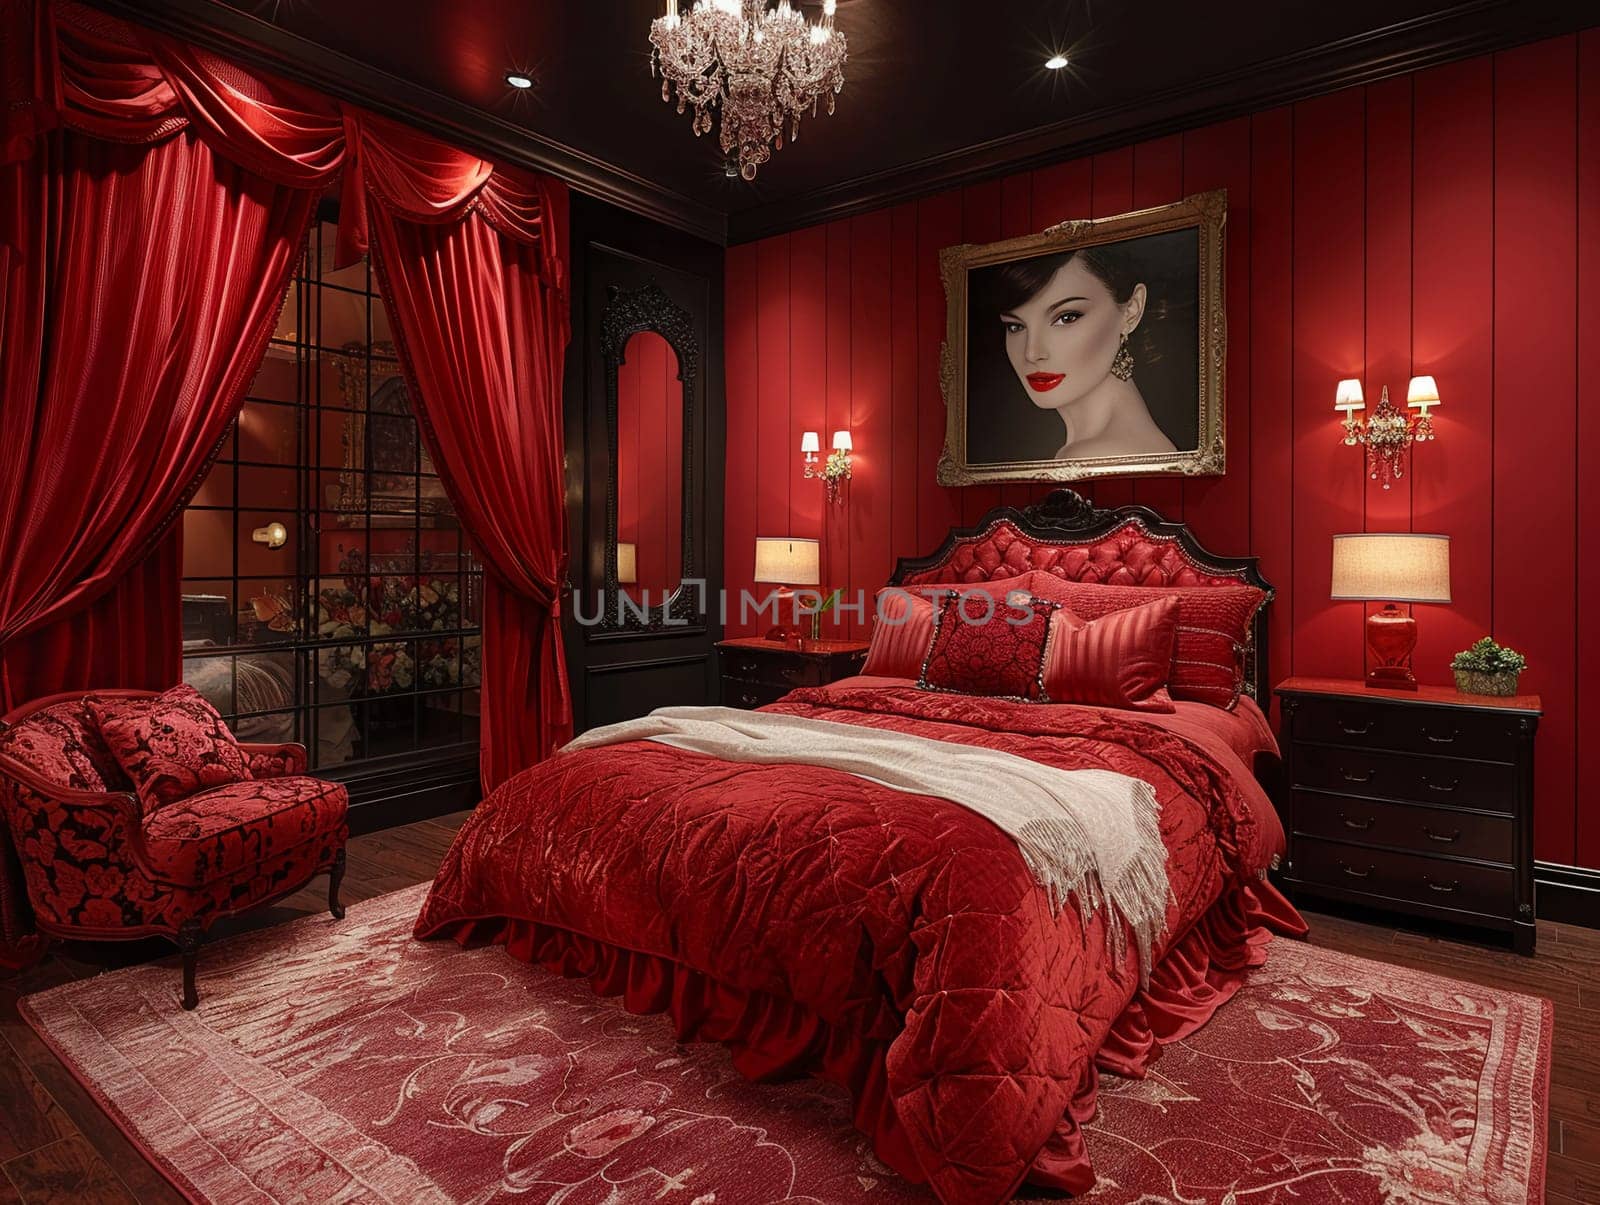 Old Hollywood glamour bedroom with satin drapes and vintage portraitsHyperrealistic